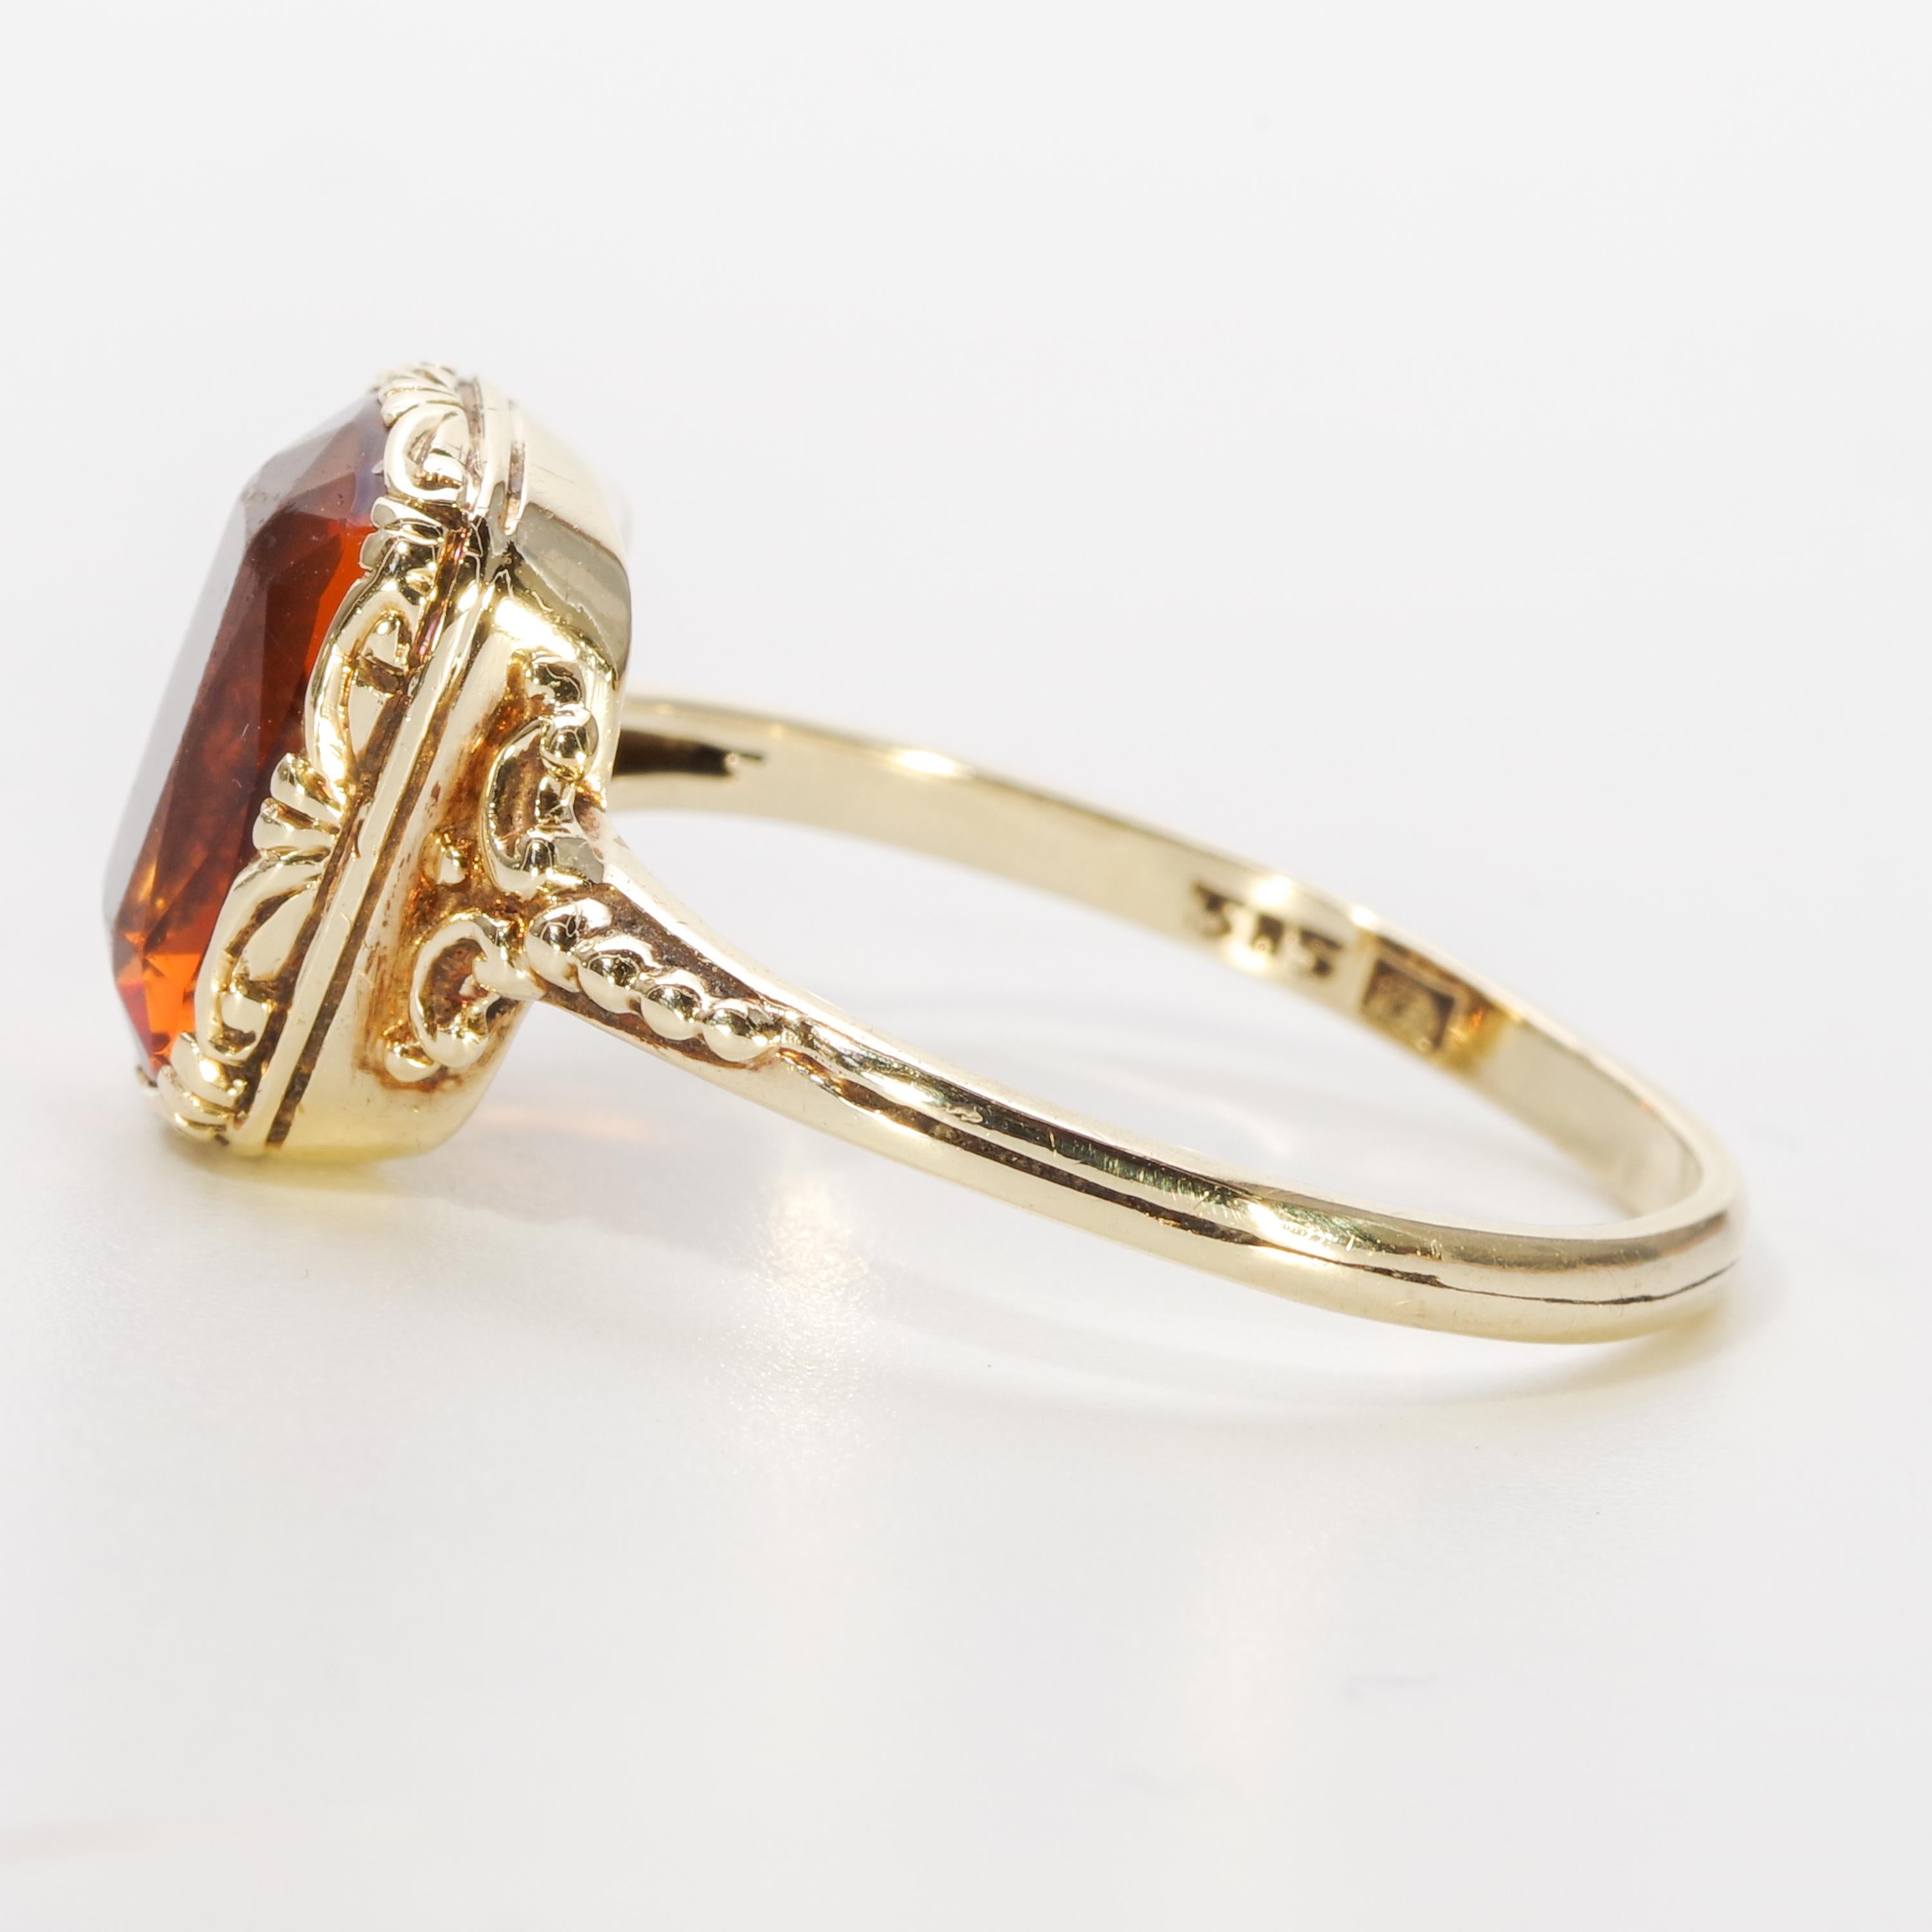 Antique Madeira Citrine Gent's Ring from Europe 1